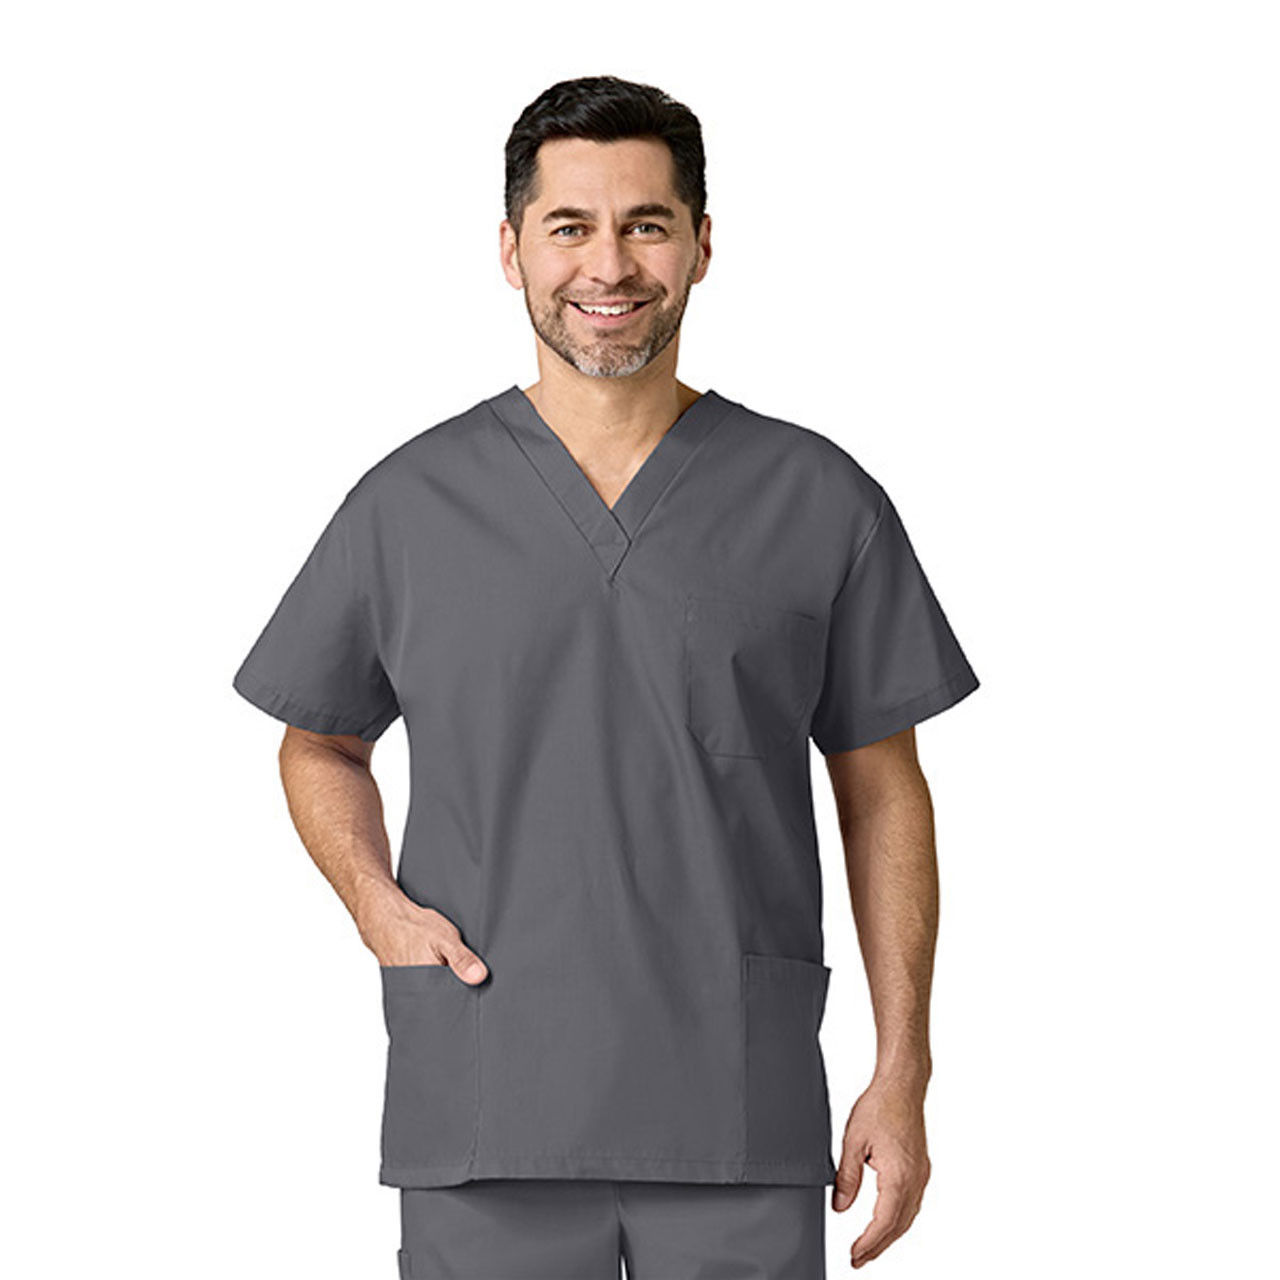 What is the fabric composition of the Fashion Seal Scrub Top?